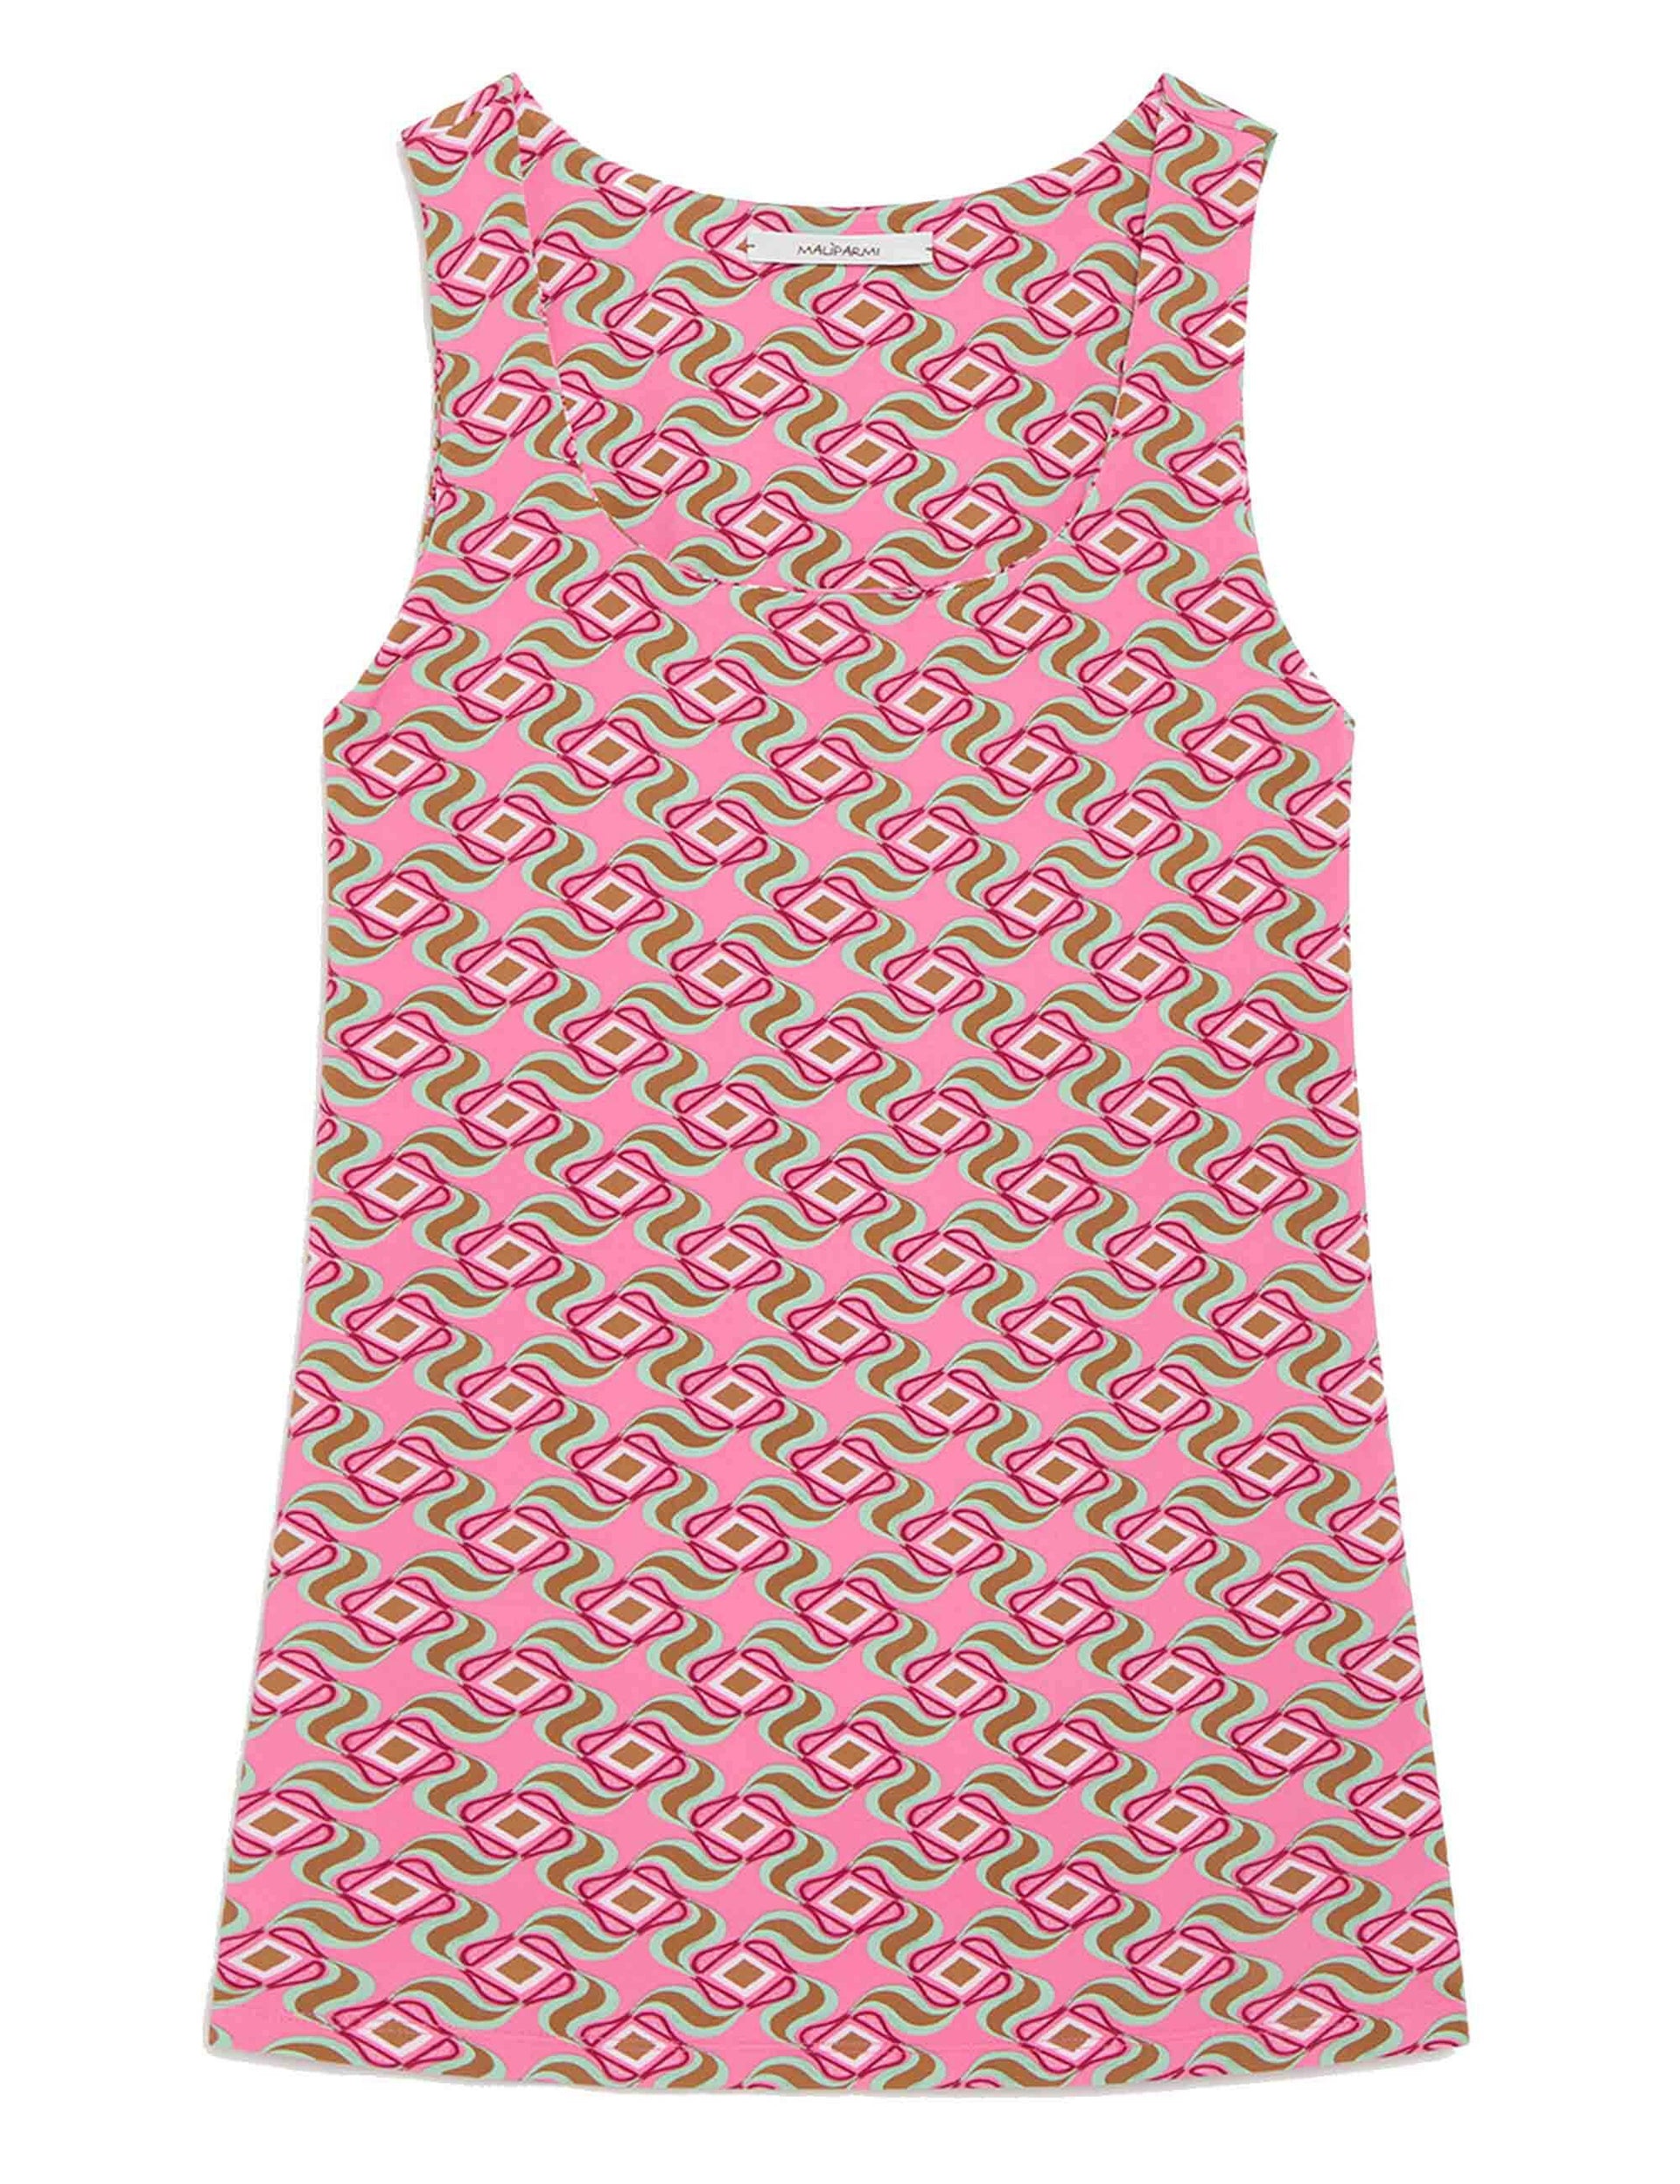 Top donna Swirl Print in jersey rosa a fantasia